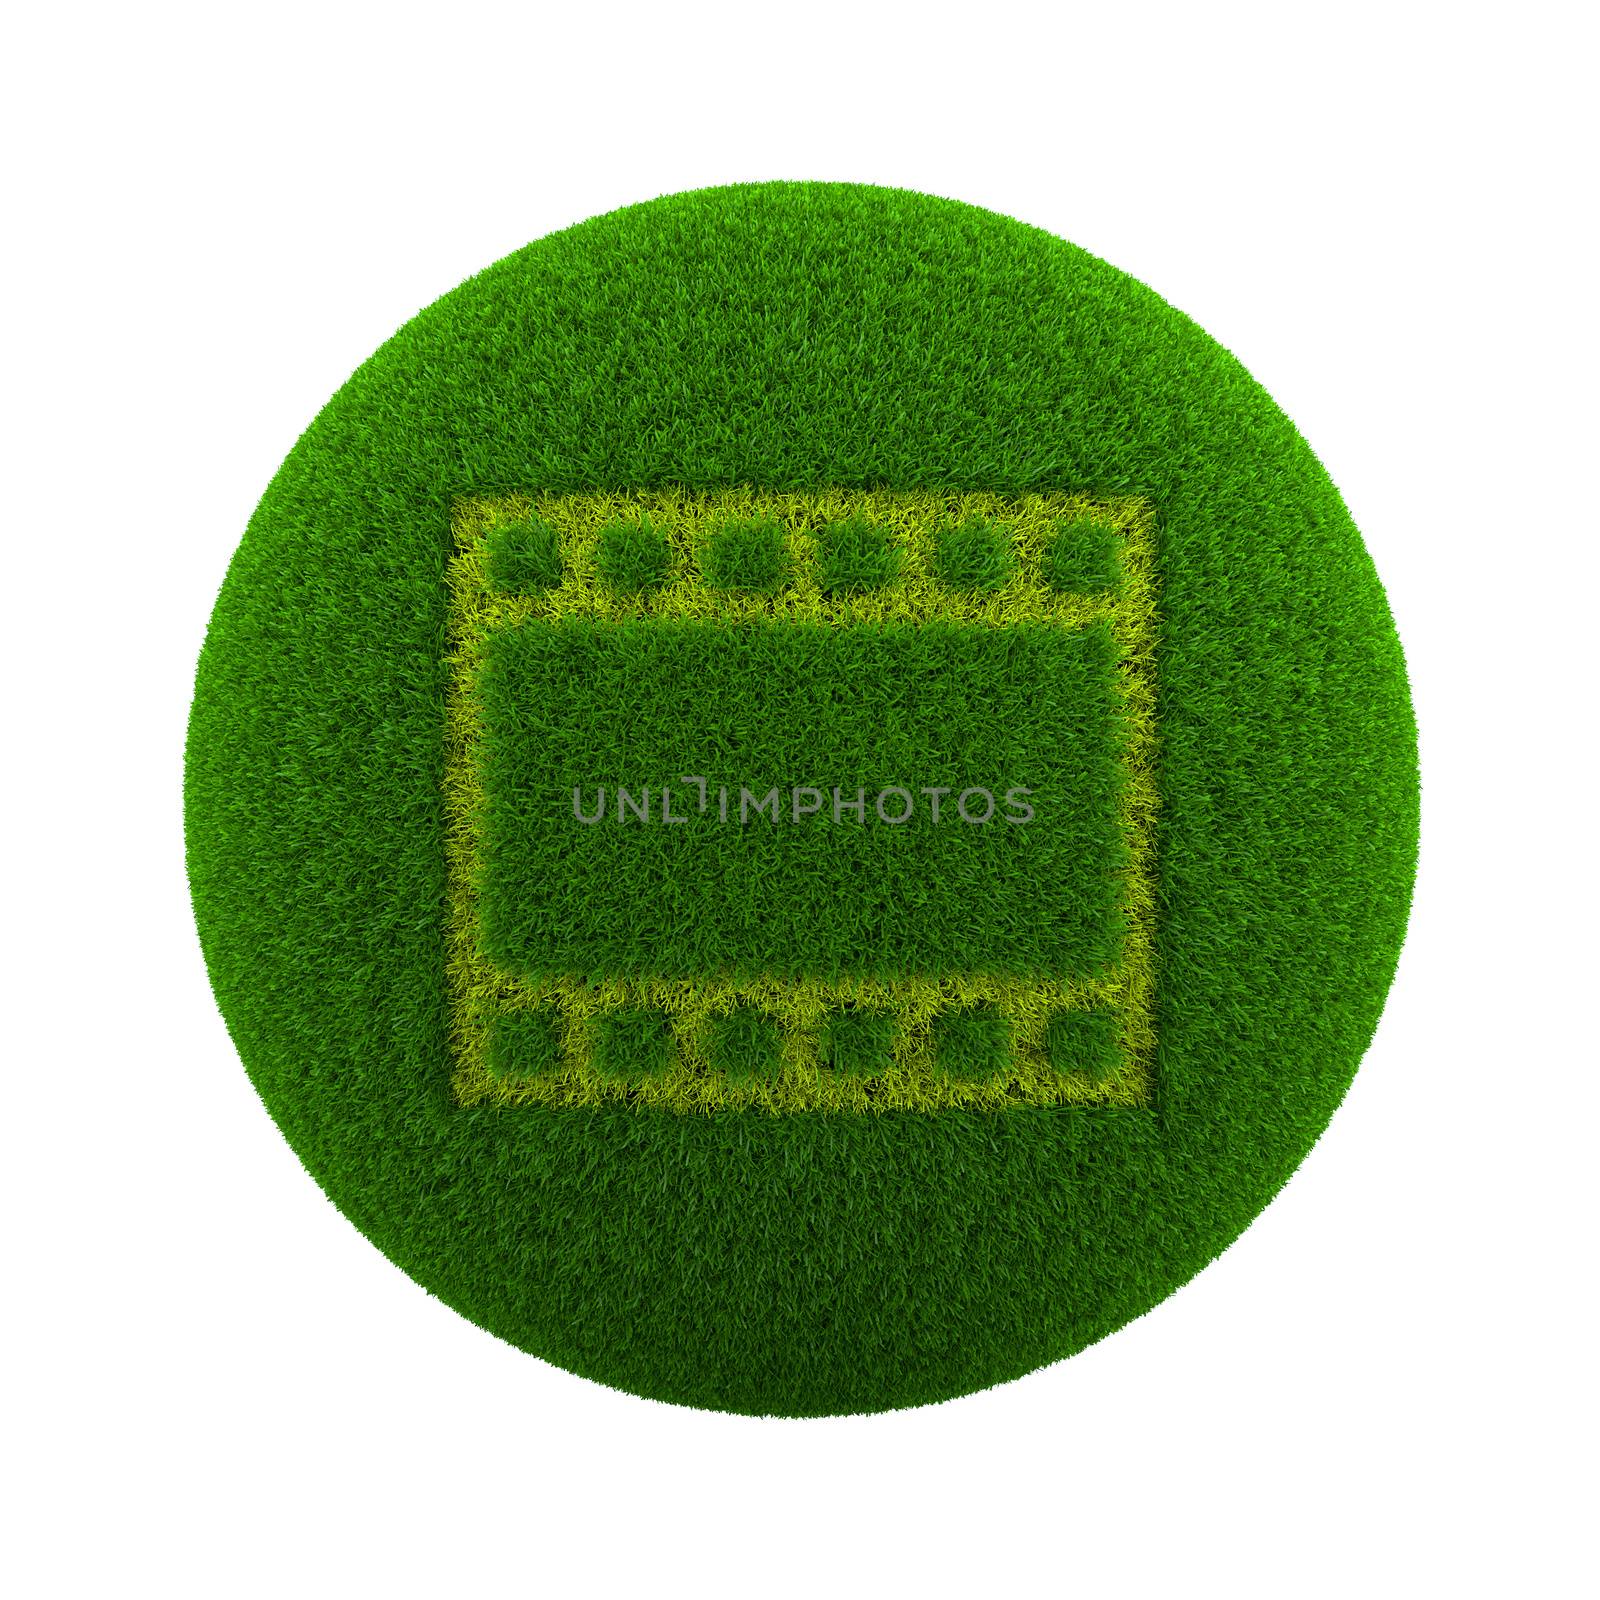 Green Globe with Grass Cutted in the Shape of a Movie Film Symbol 3D Illustration Isolated on White Background